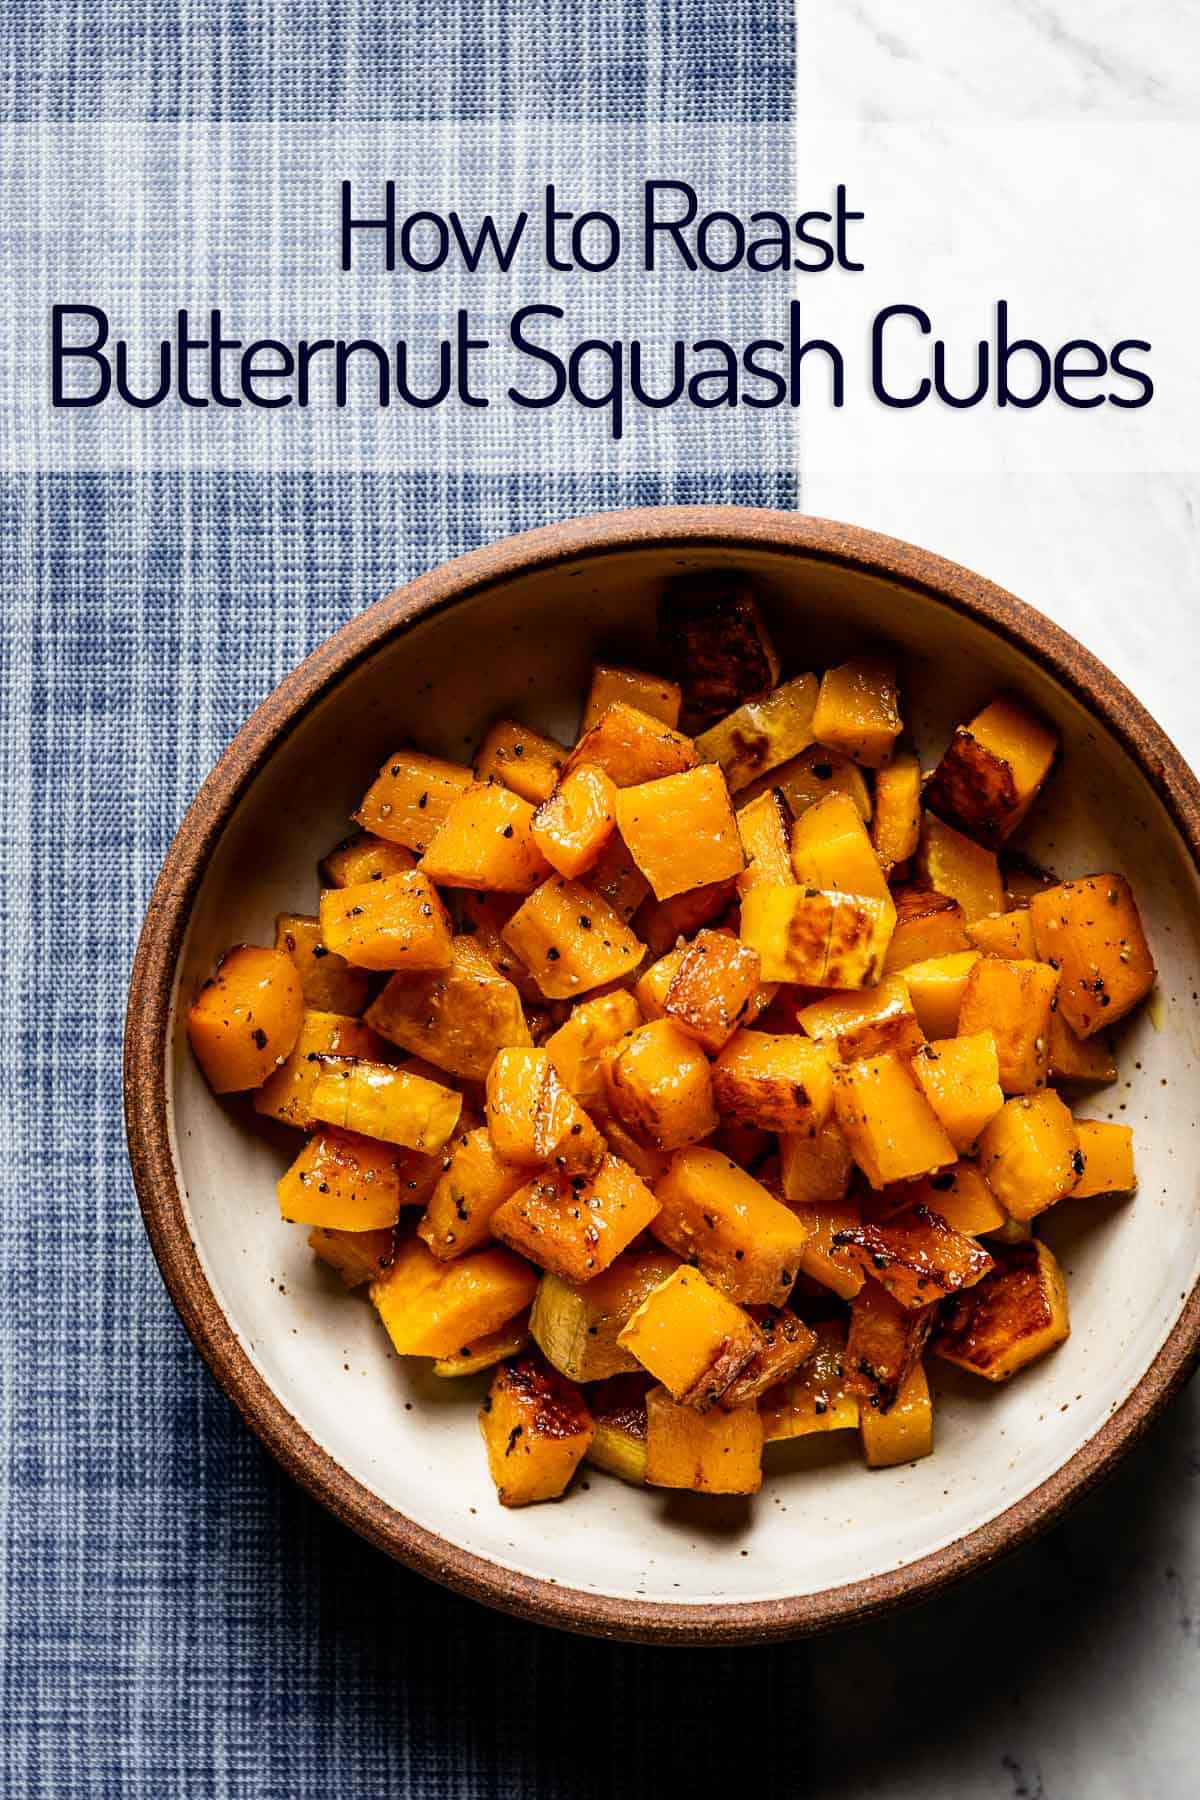 roasted butternut squash cubes in a bowl with text on the image